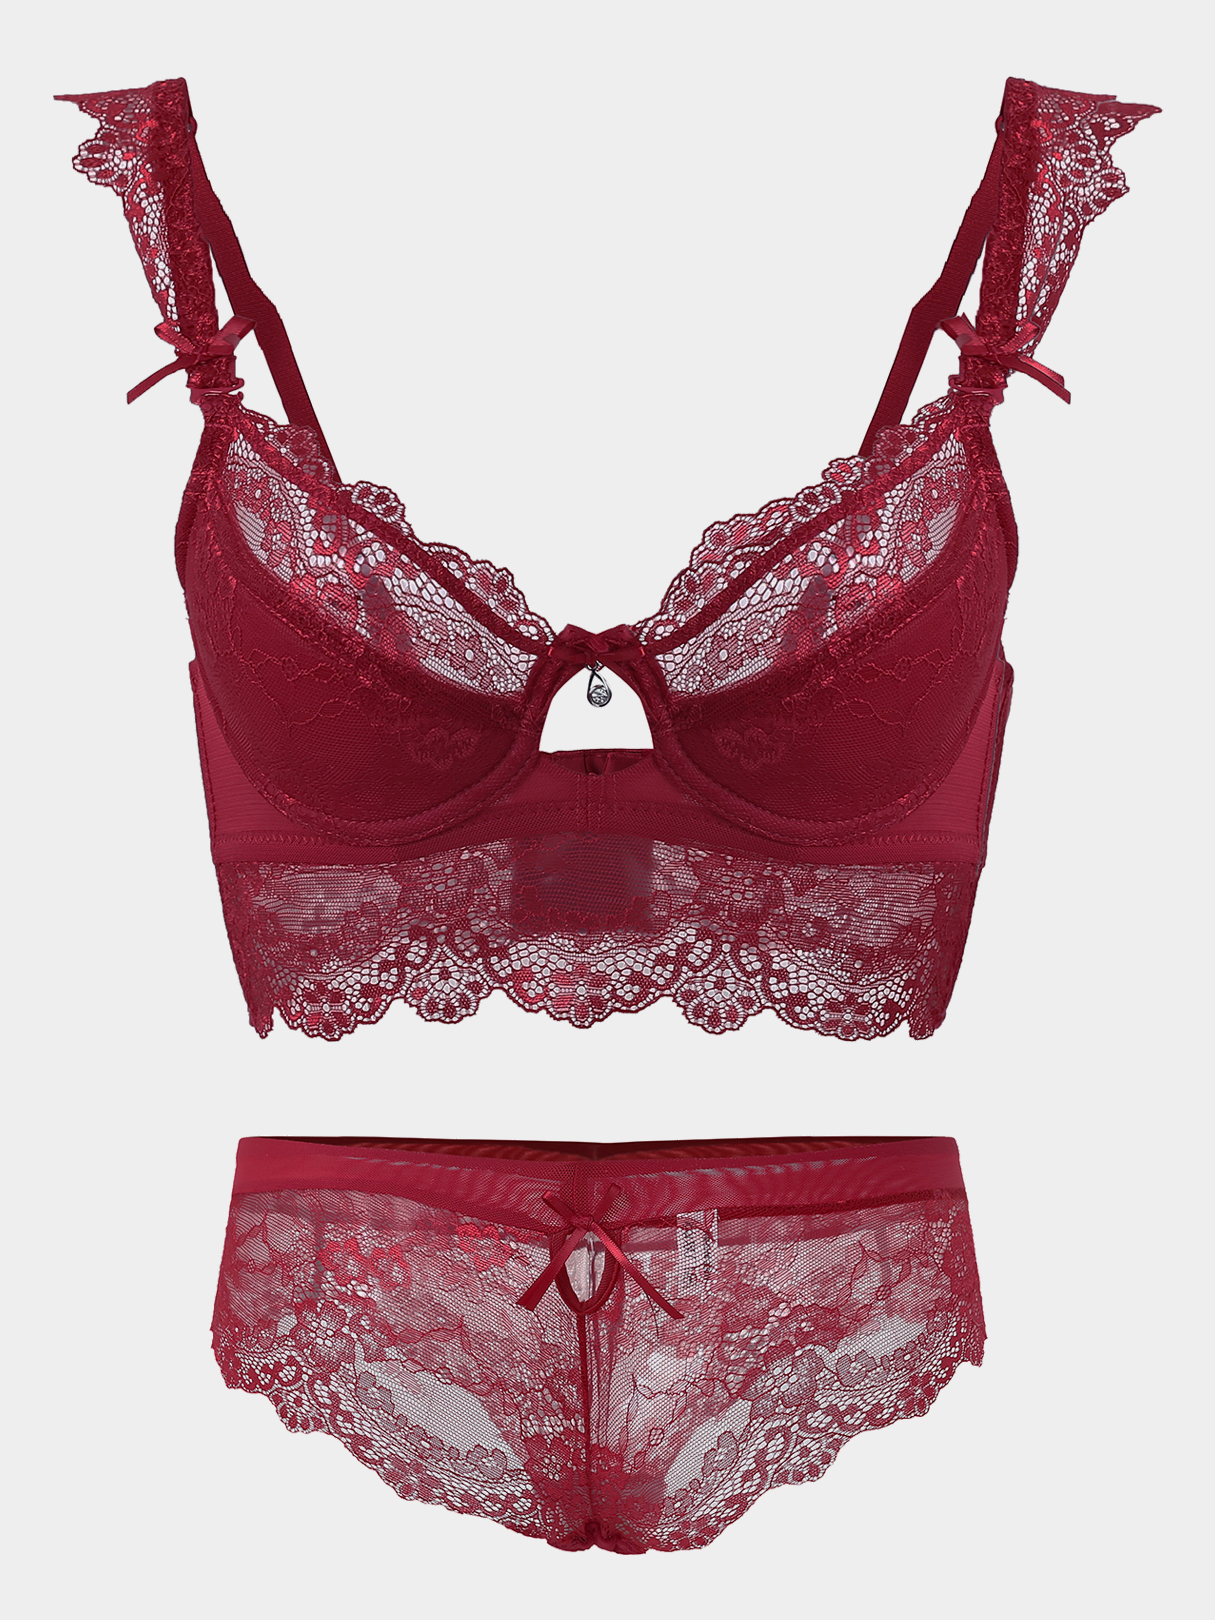 Lace Underwire Knots & Strass Details Lingerie Set in Rot